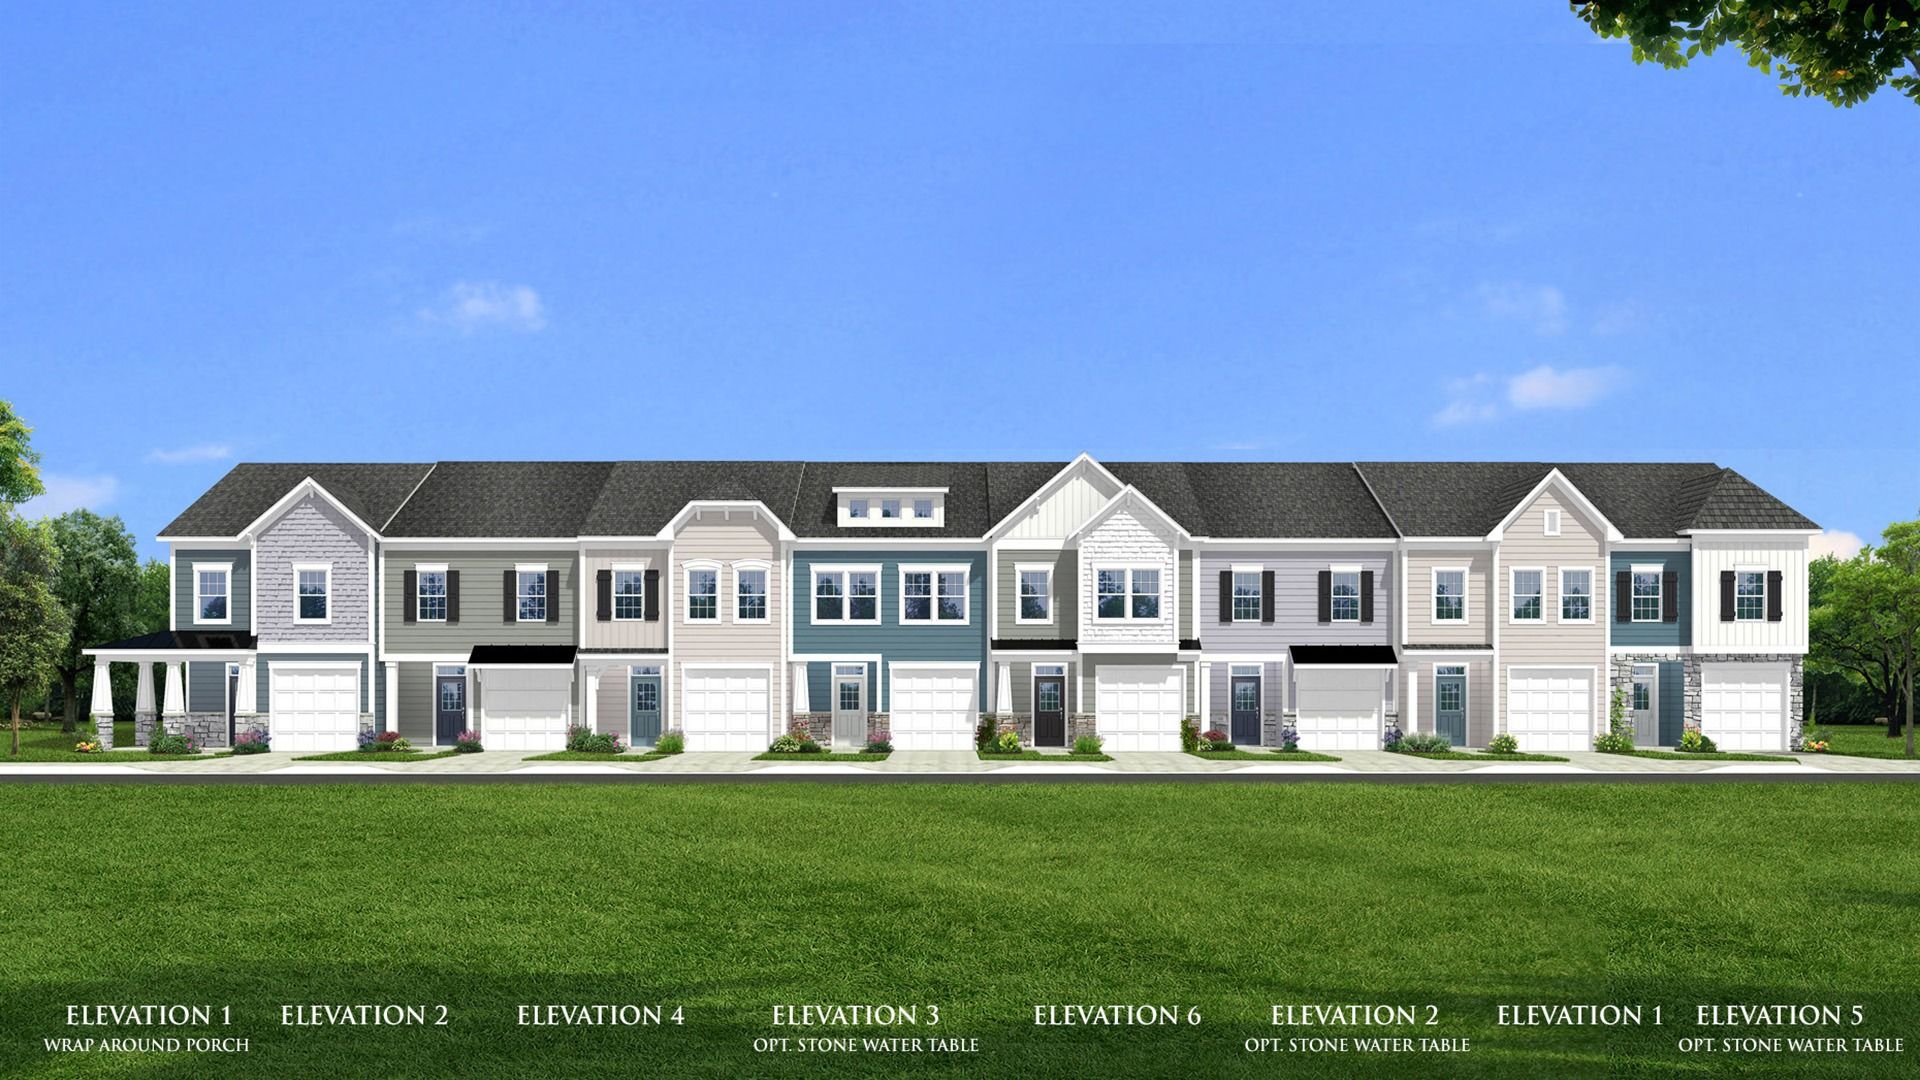 Lynnhaven Elevations 1-6:Elevation rendering of the DRB Homes Lynnhaven Townhome Design. They are two stories with a one-car garage and driveway.